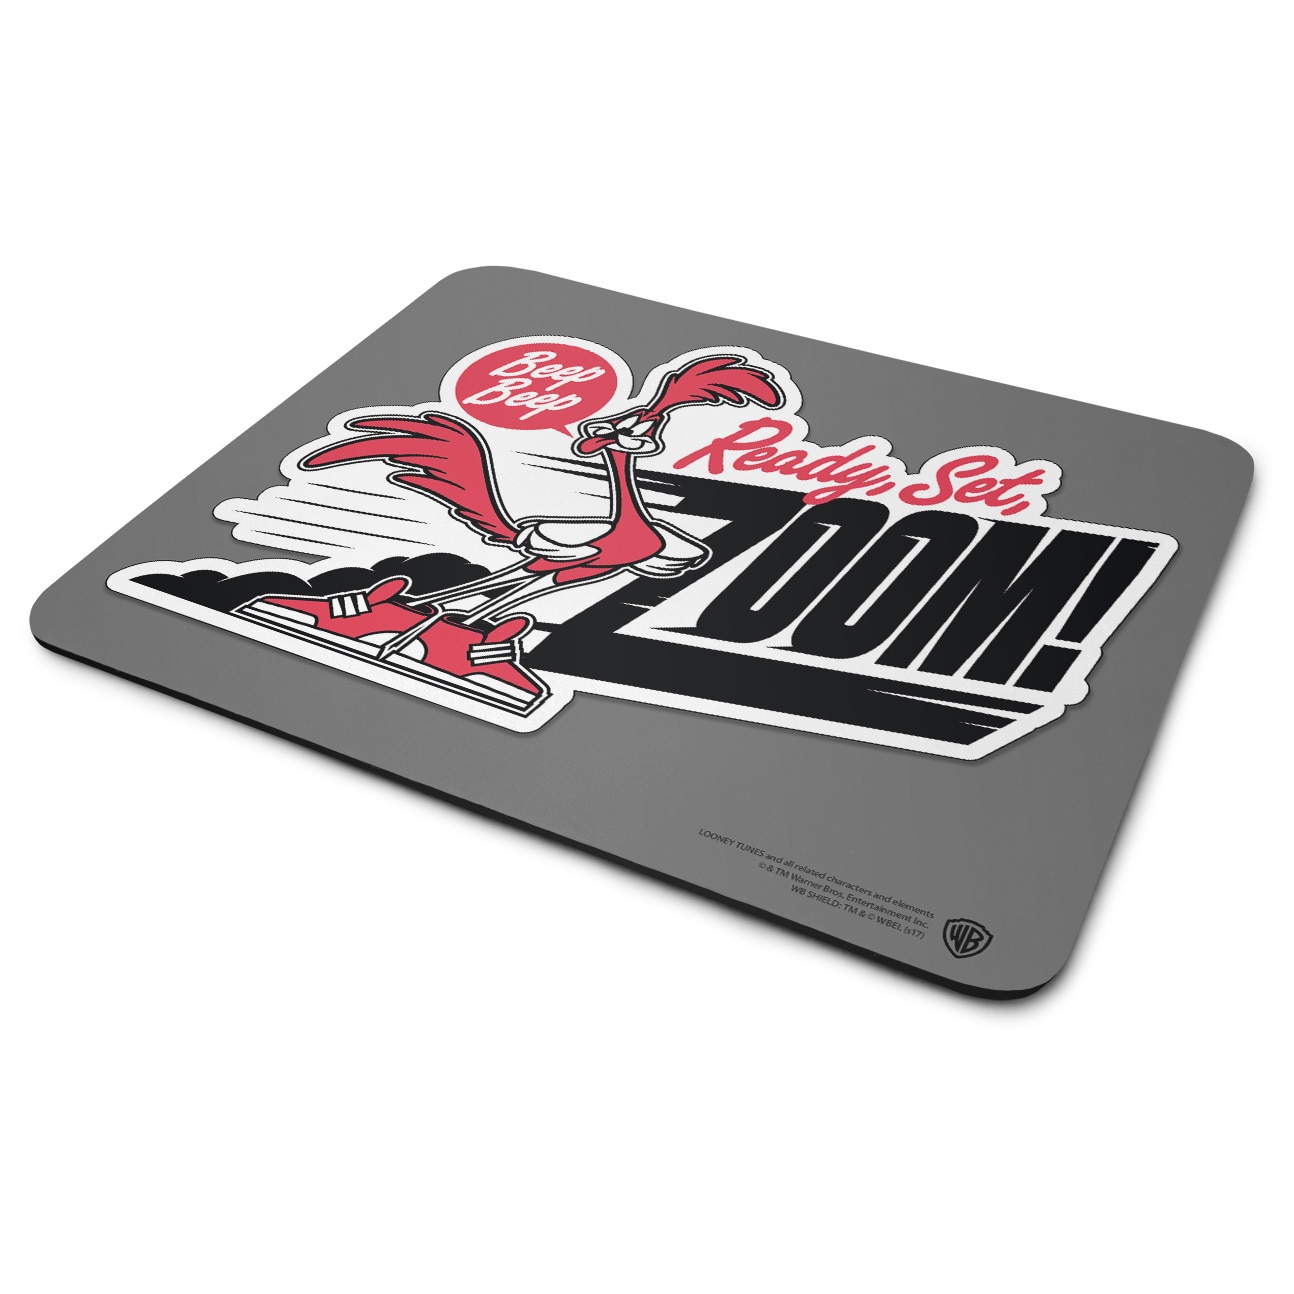 Road Runner BEEP BEEP Mouse Pad 3-Pack